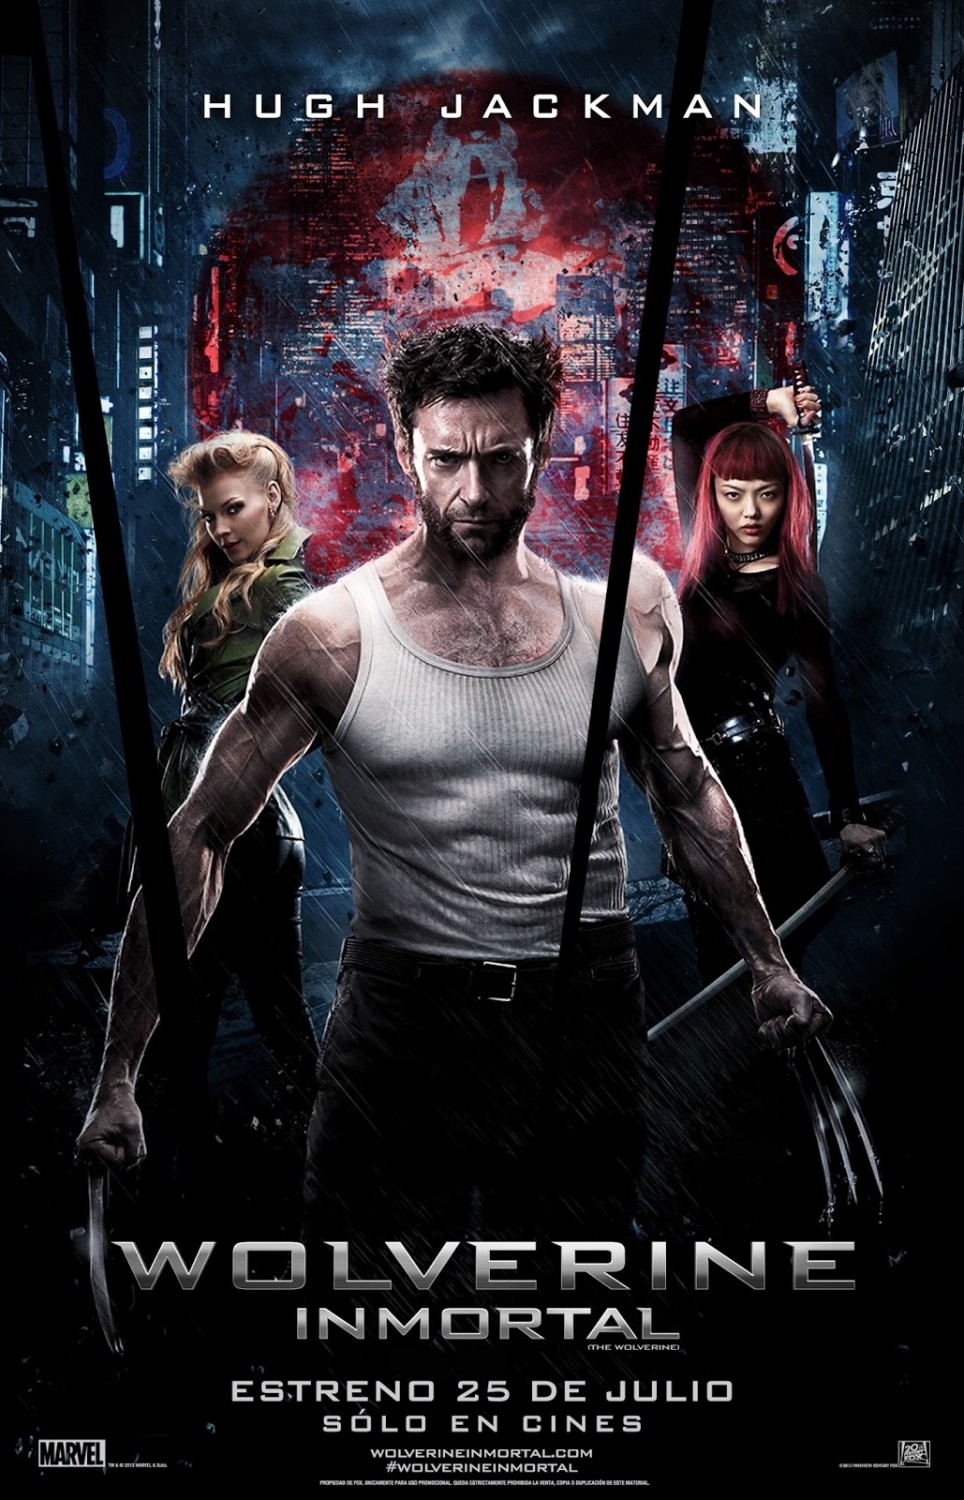 Extra Large Movie Poster Image for The Wolverine (#18 of 18)